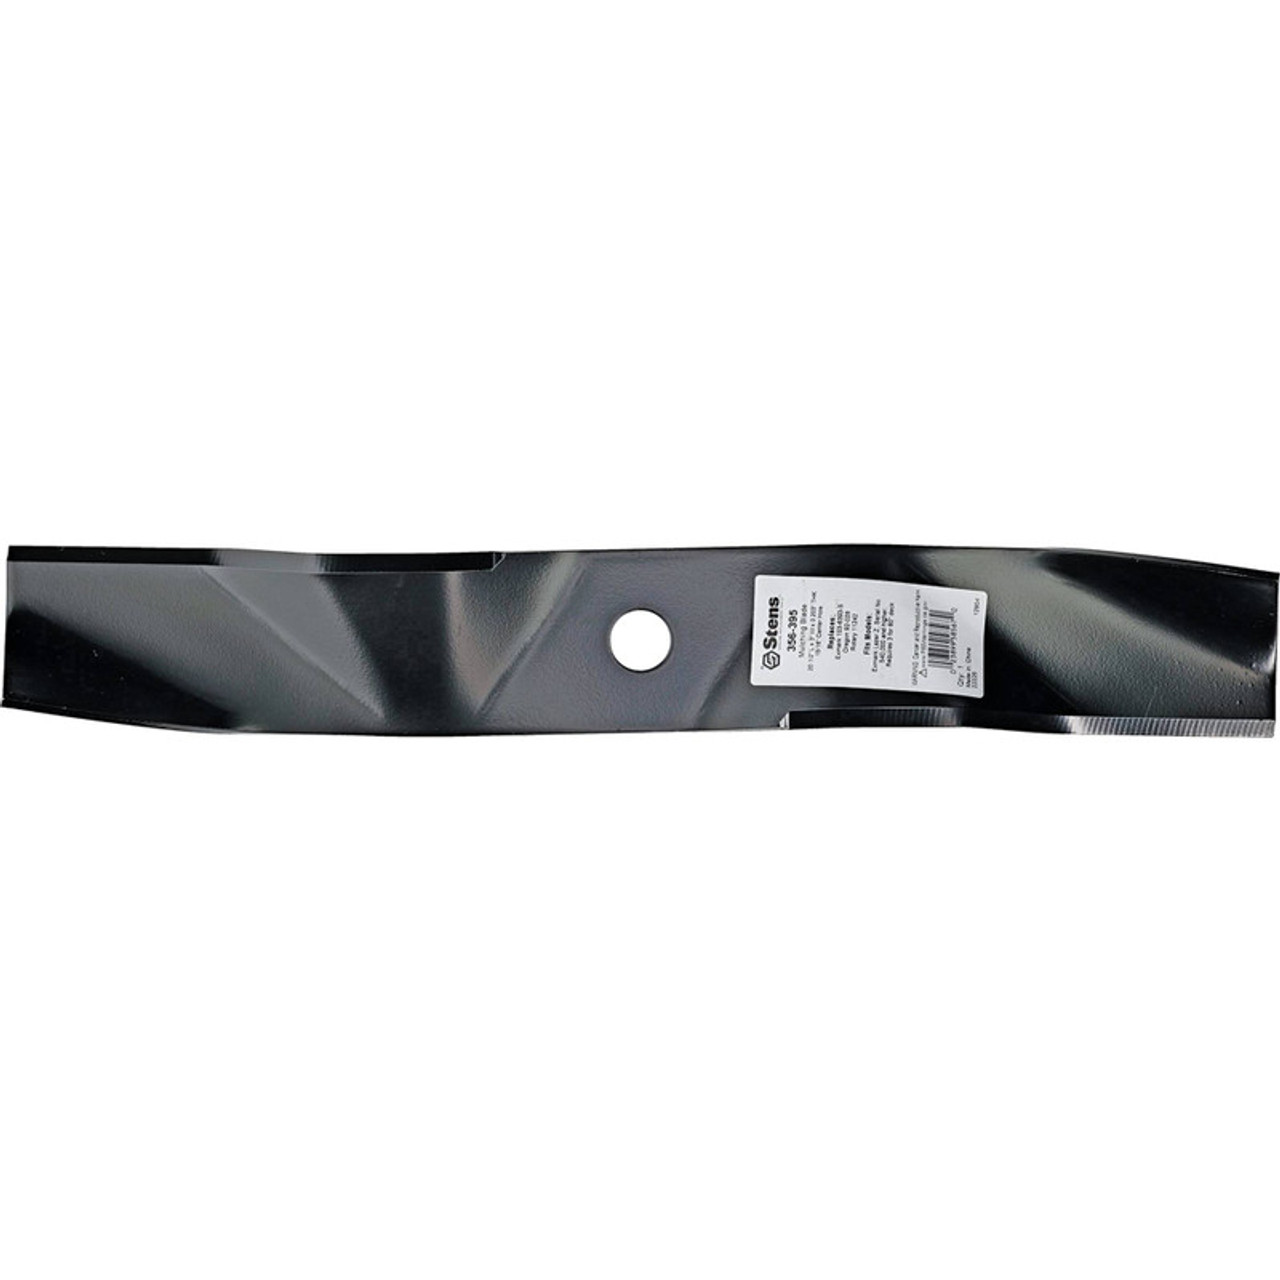 Stens 356-395 Stens Mulching Blade - (Replaces Exmark 103-6383, 103-6383-S, 103-6393, 103-6393-S, 103-6398, 103-6398-S, 103-6403, 103-6403-S, 116-5174, 116-5174-S )